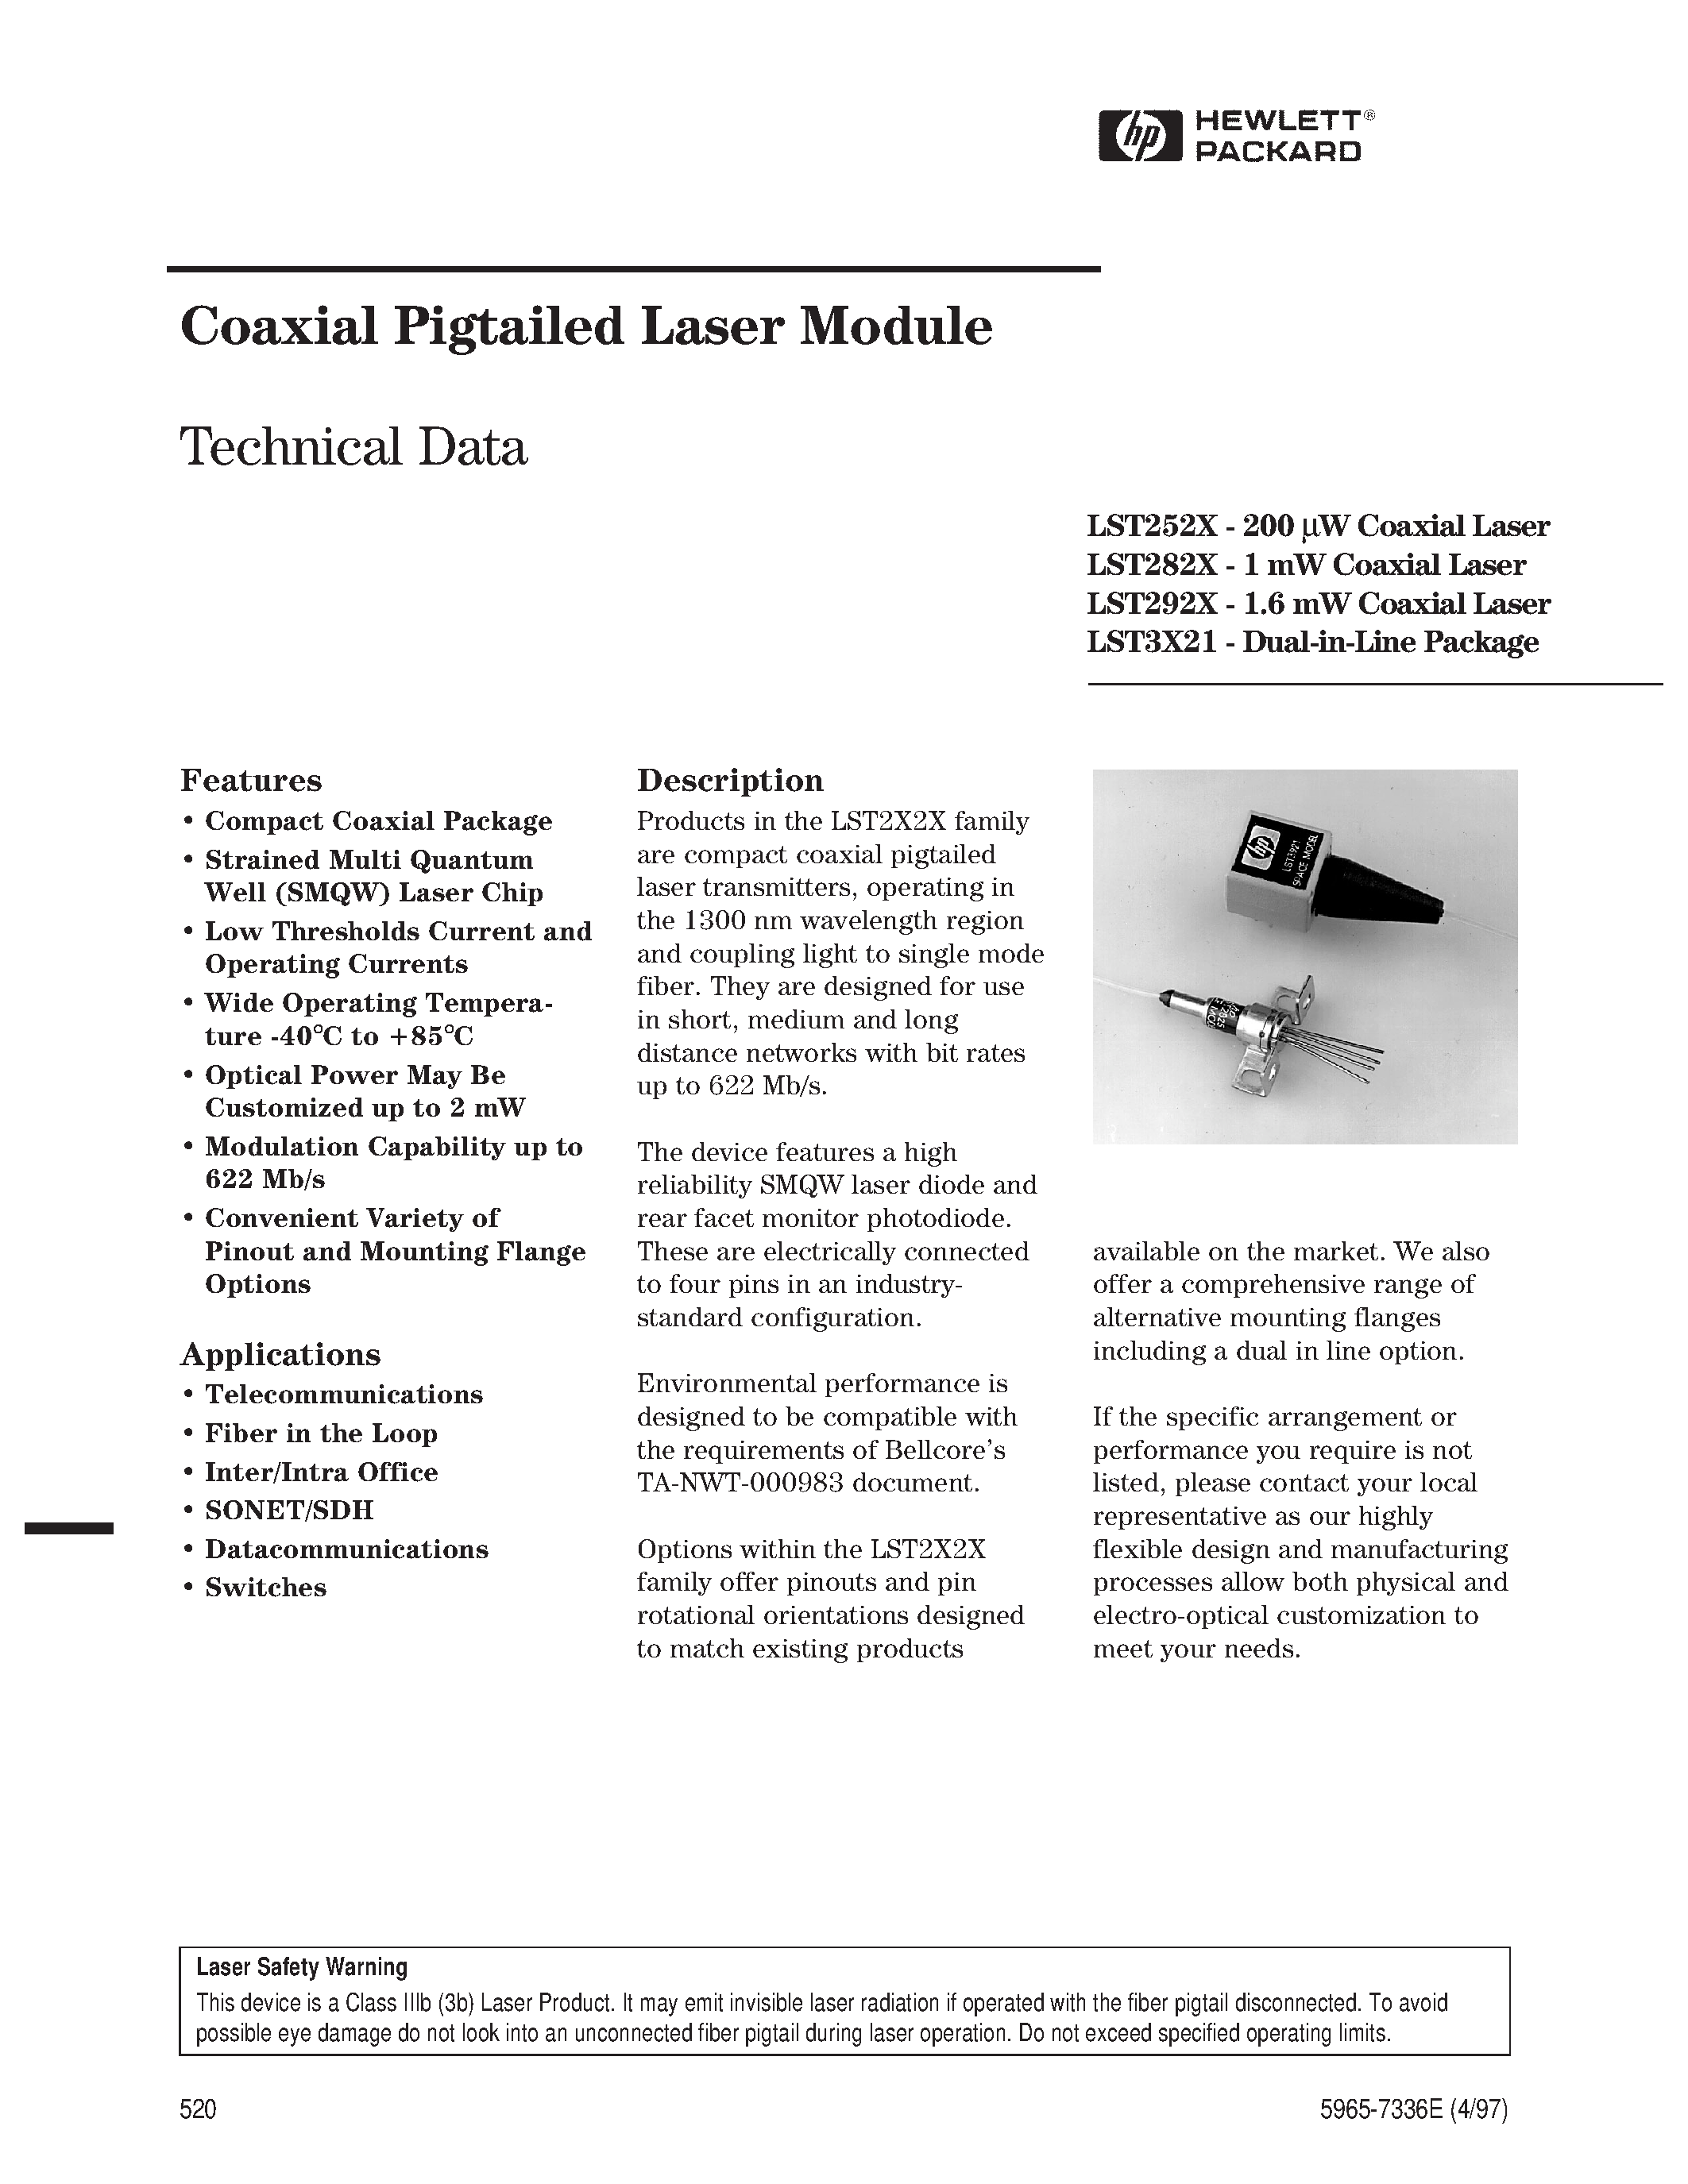 Datasheet LST2925-S4-B-SC - Coaxial Pigtailed Laser Module page 1